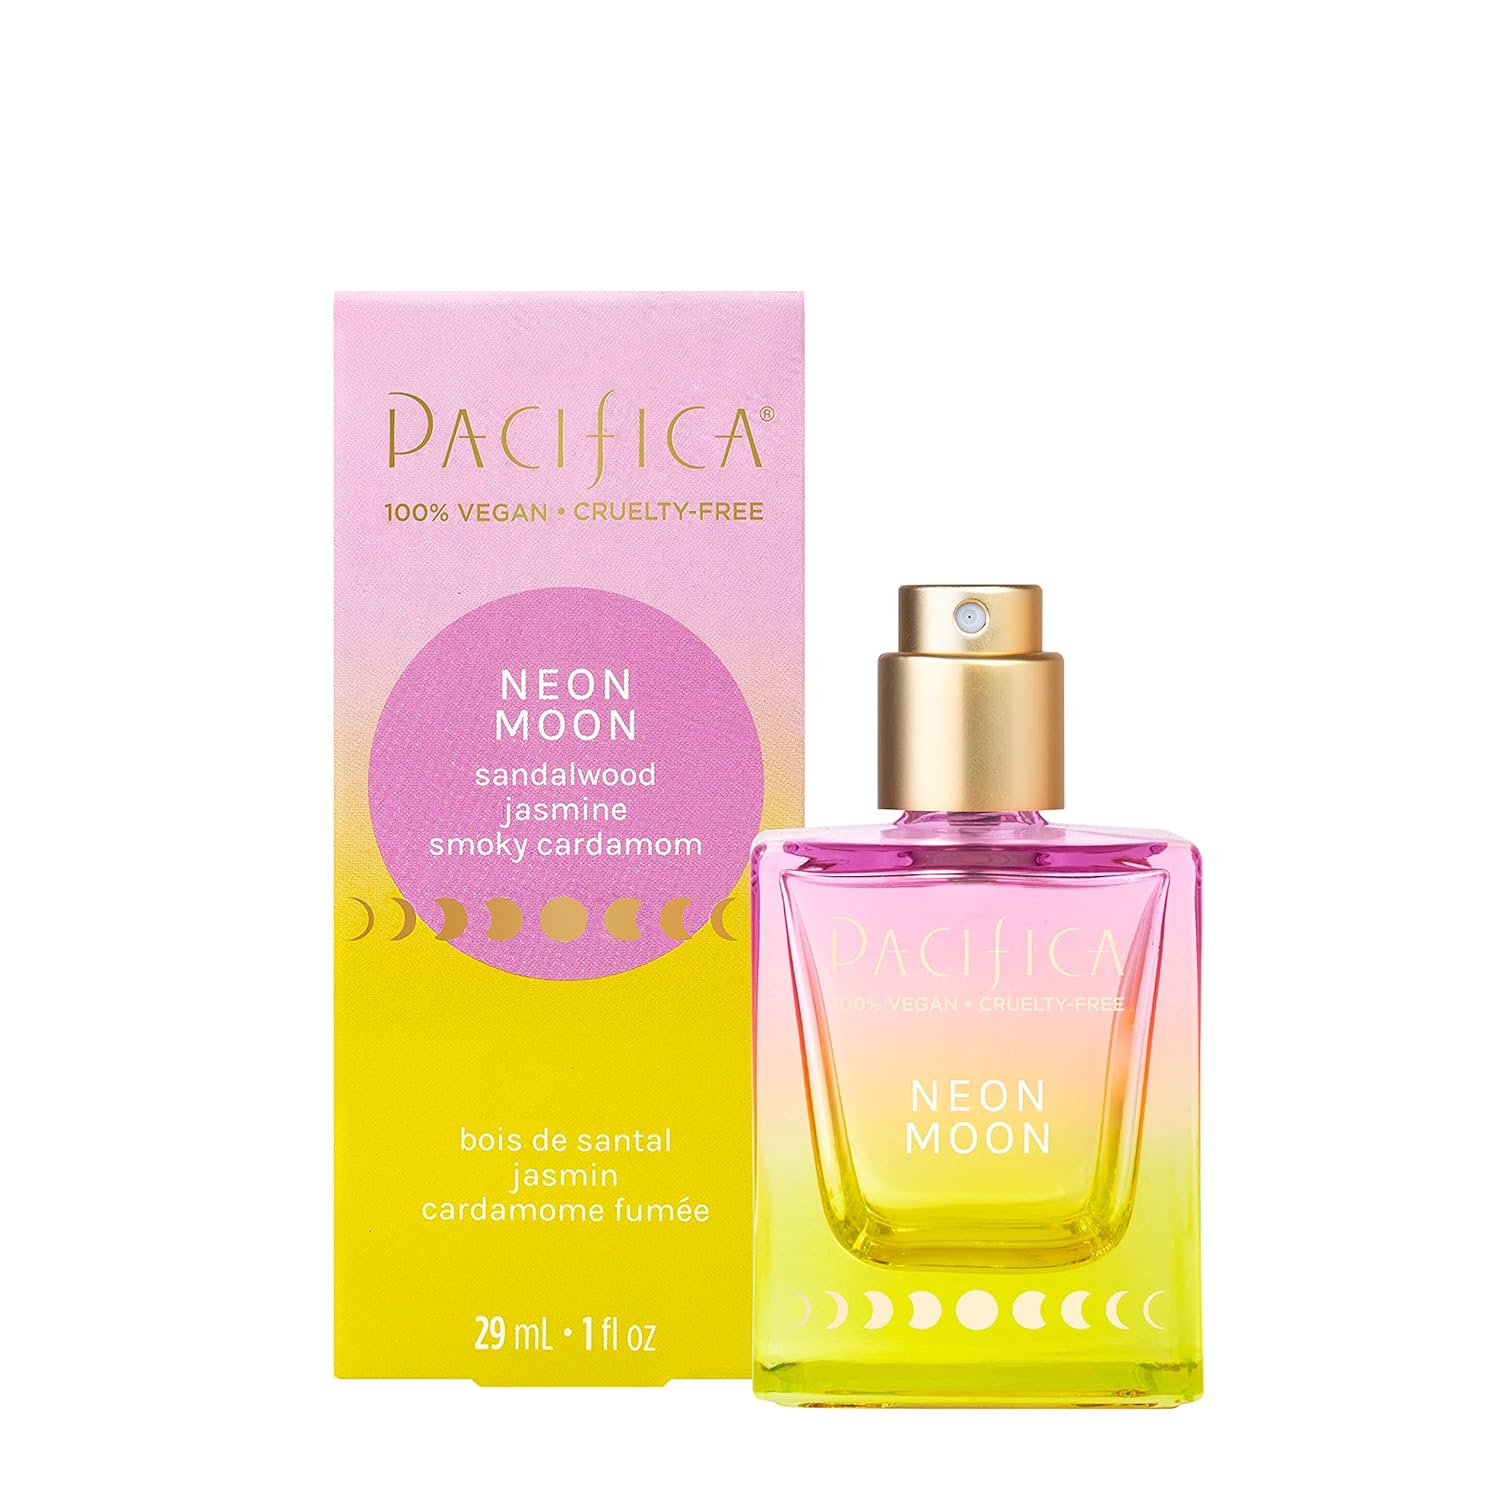 1-Oz Pacifica Beauty Spray Perfume (Neon Moon) $10.45 w/ S&S + Free Shipping w/ Prime or on $35+